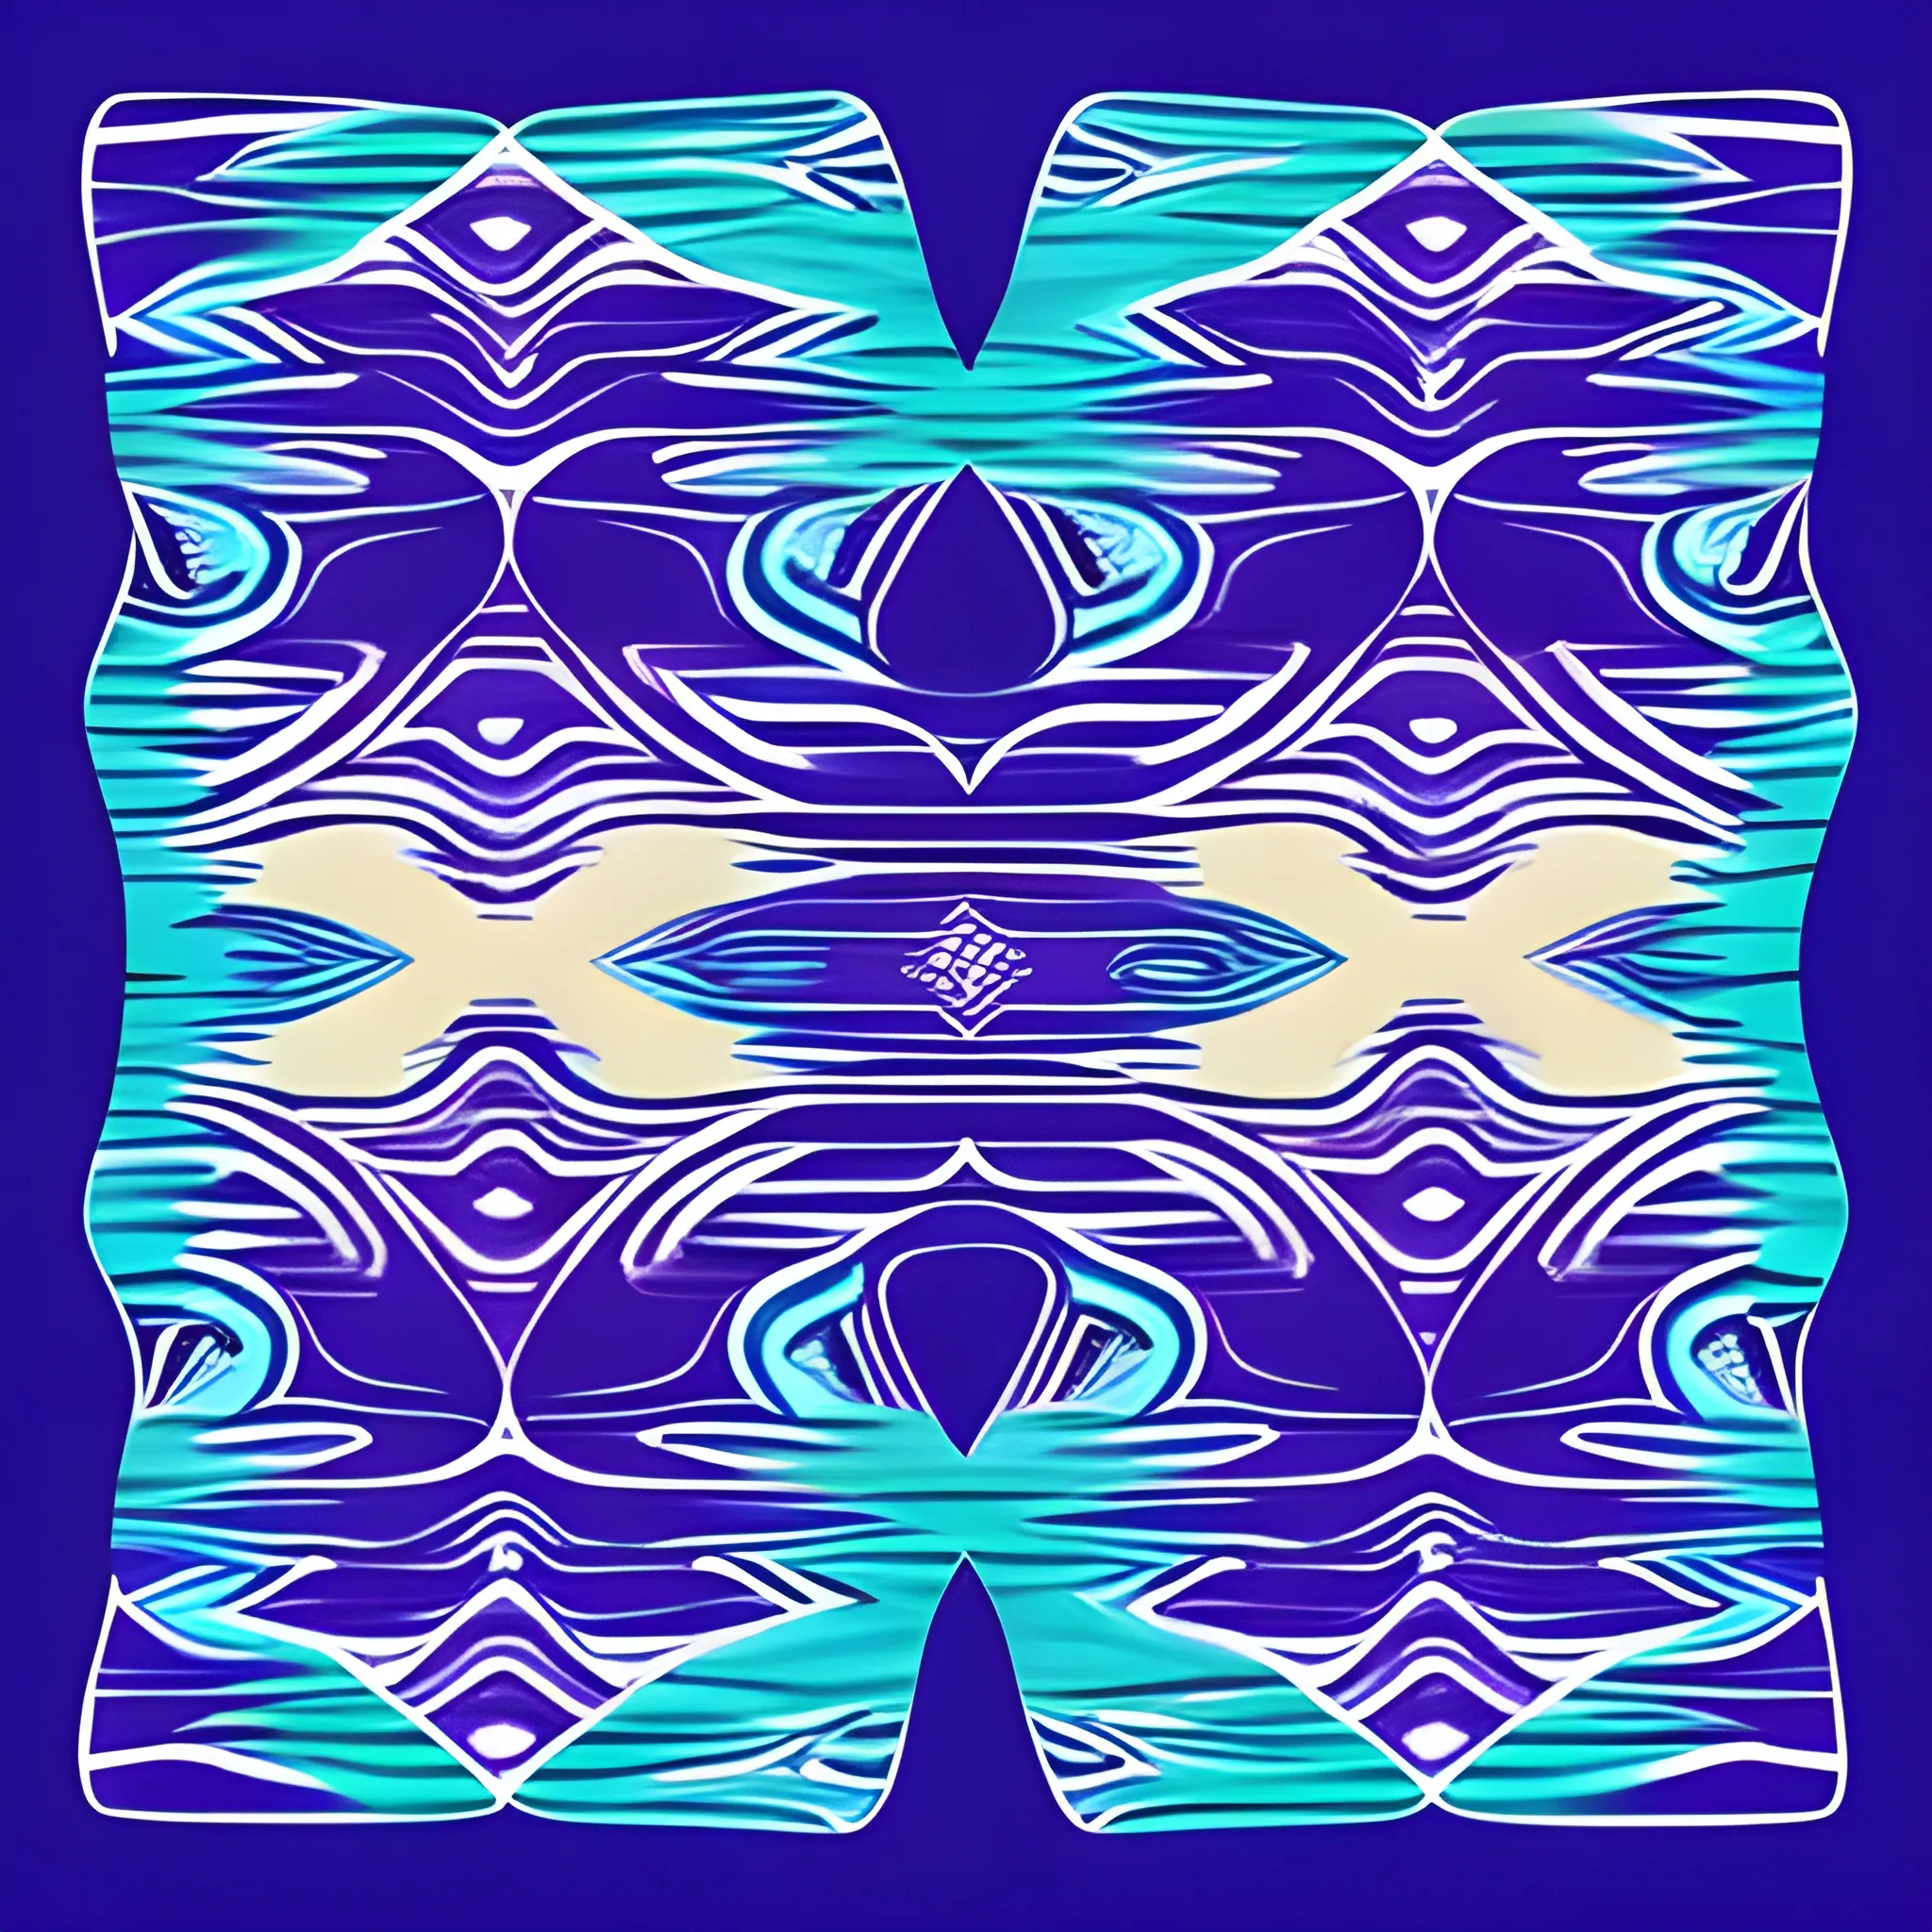 weft ikat motif designs blue purple colour, abstract designs that look like water ripple effect, bigger motifs, unique abstract design.

creative, new, innovative